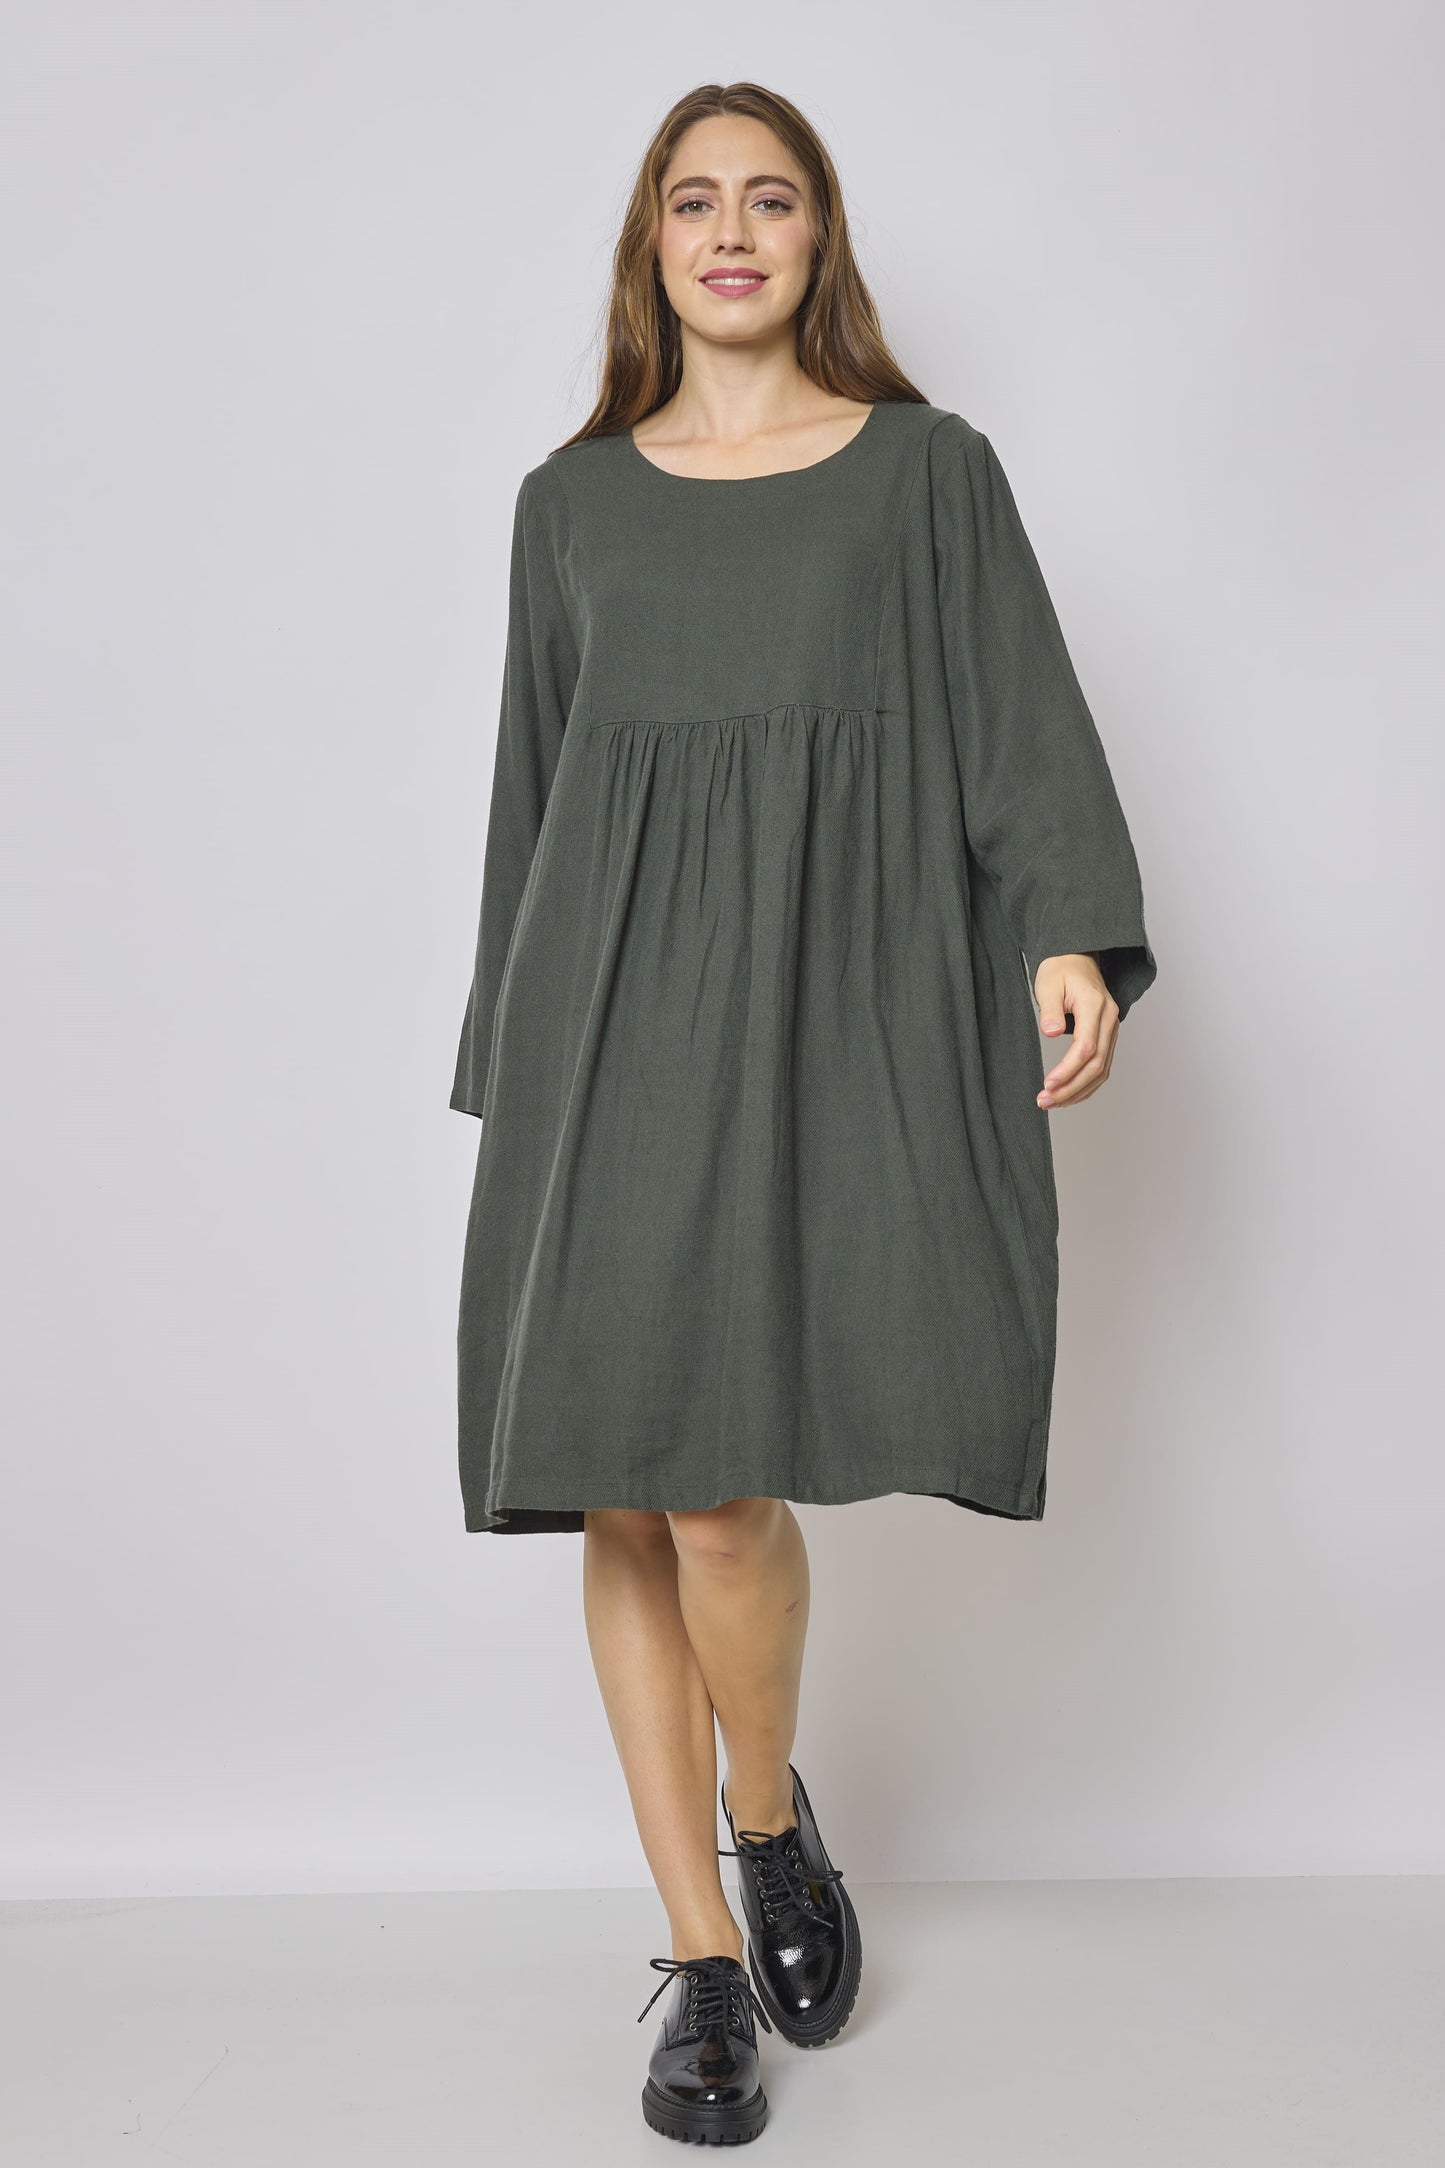 Green mid-length cotton and linen dress